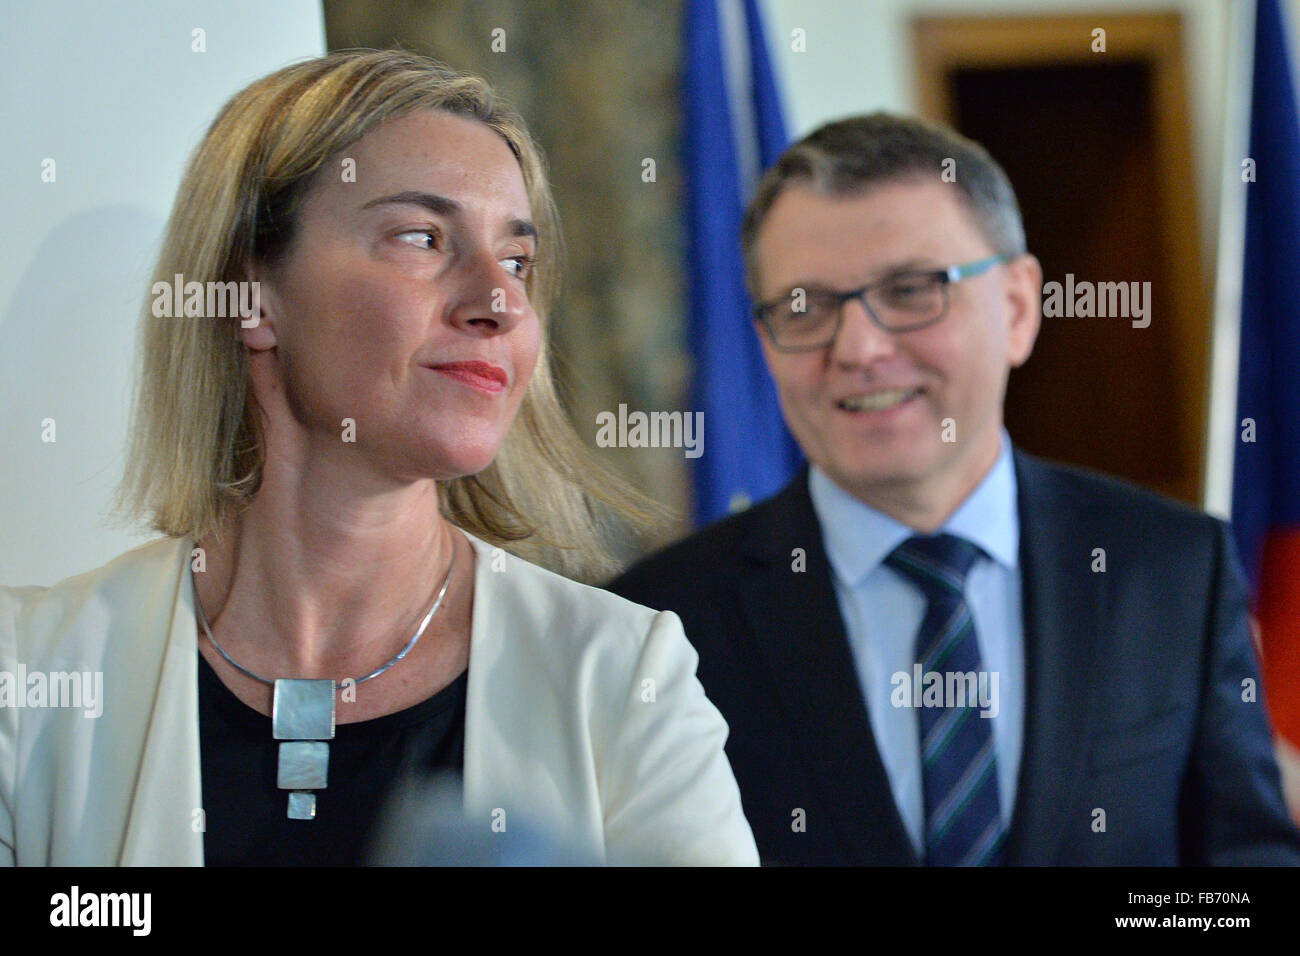 Prague, Czech Republic. 11th Jan, 2016. Czech Foreign Minister Lubomir Zaoralek, right, holds a press conference with European Union foreign policy chief Federica Mogherini, left, in Prague, Czech Republic, Monday, Jan. 11, 2016. © Michal Dolezal/CTK Photo/Alamy Live News Stock Photo